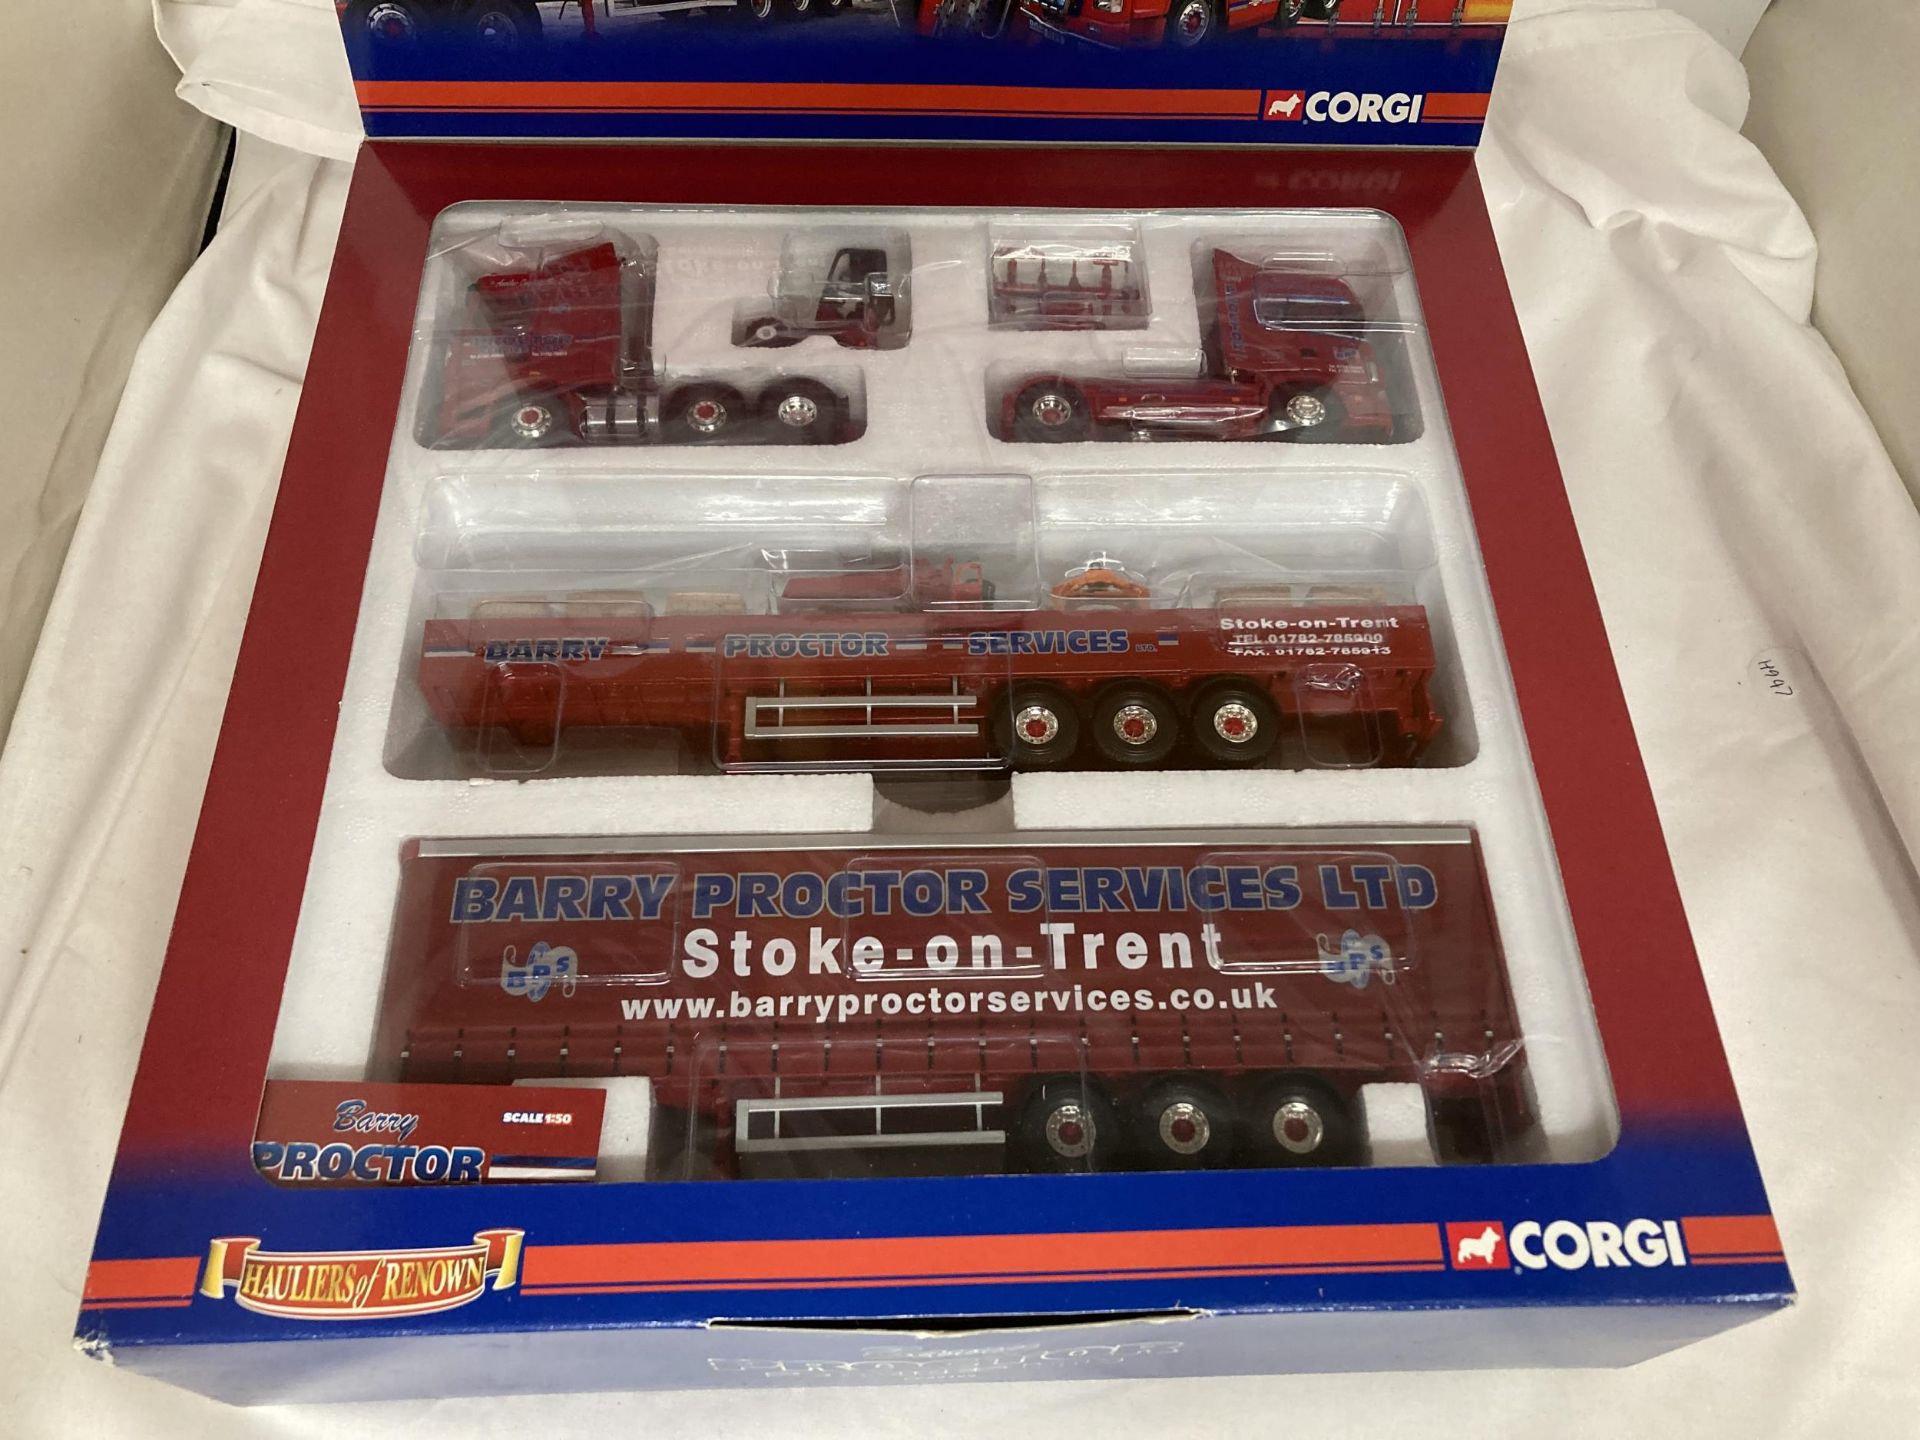 A CORGI MODEL NO. CC99169 - BARRY PROCTOR SERVICES LIMITED (MINT) BOXED 1:50 SCALE - Image 2 of 3